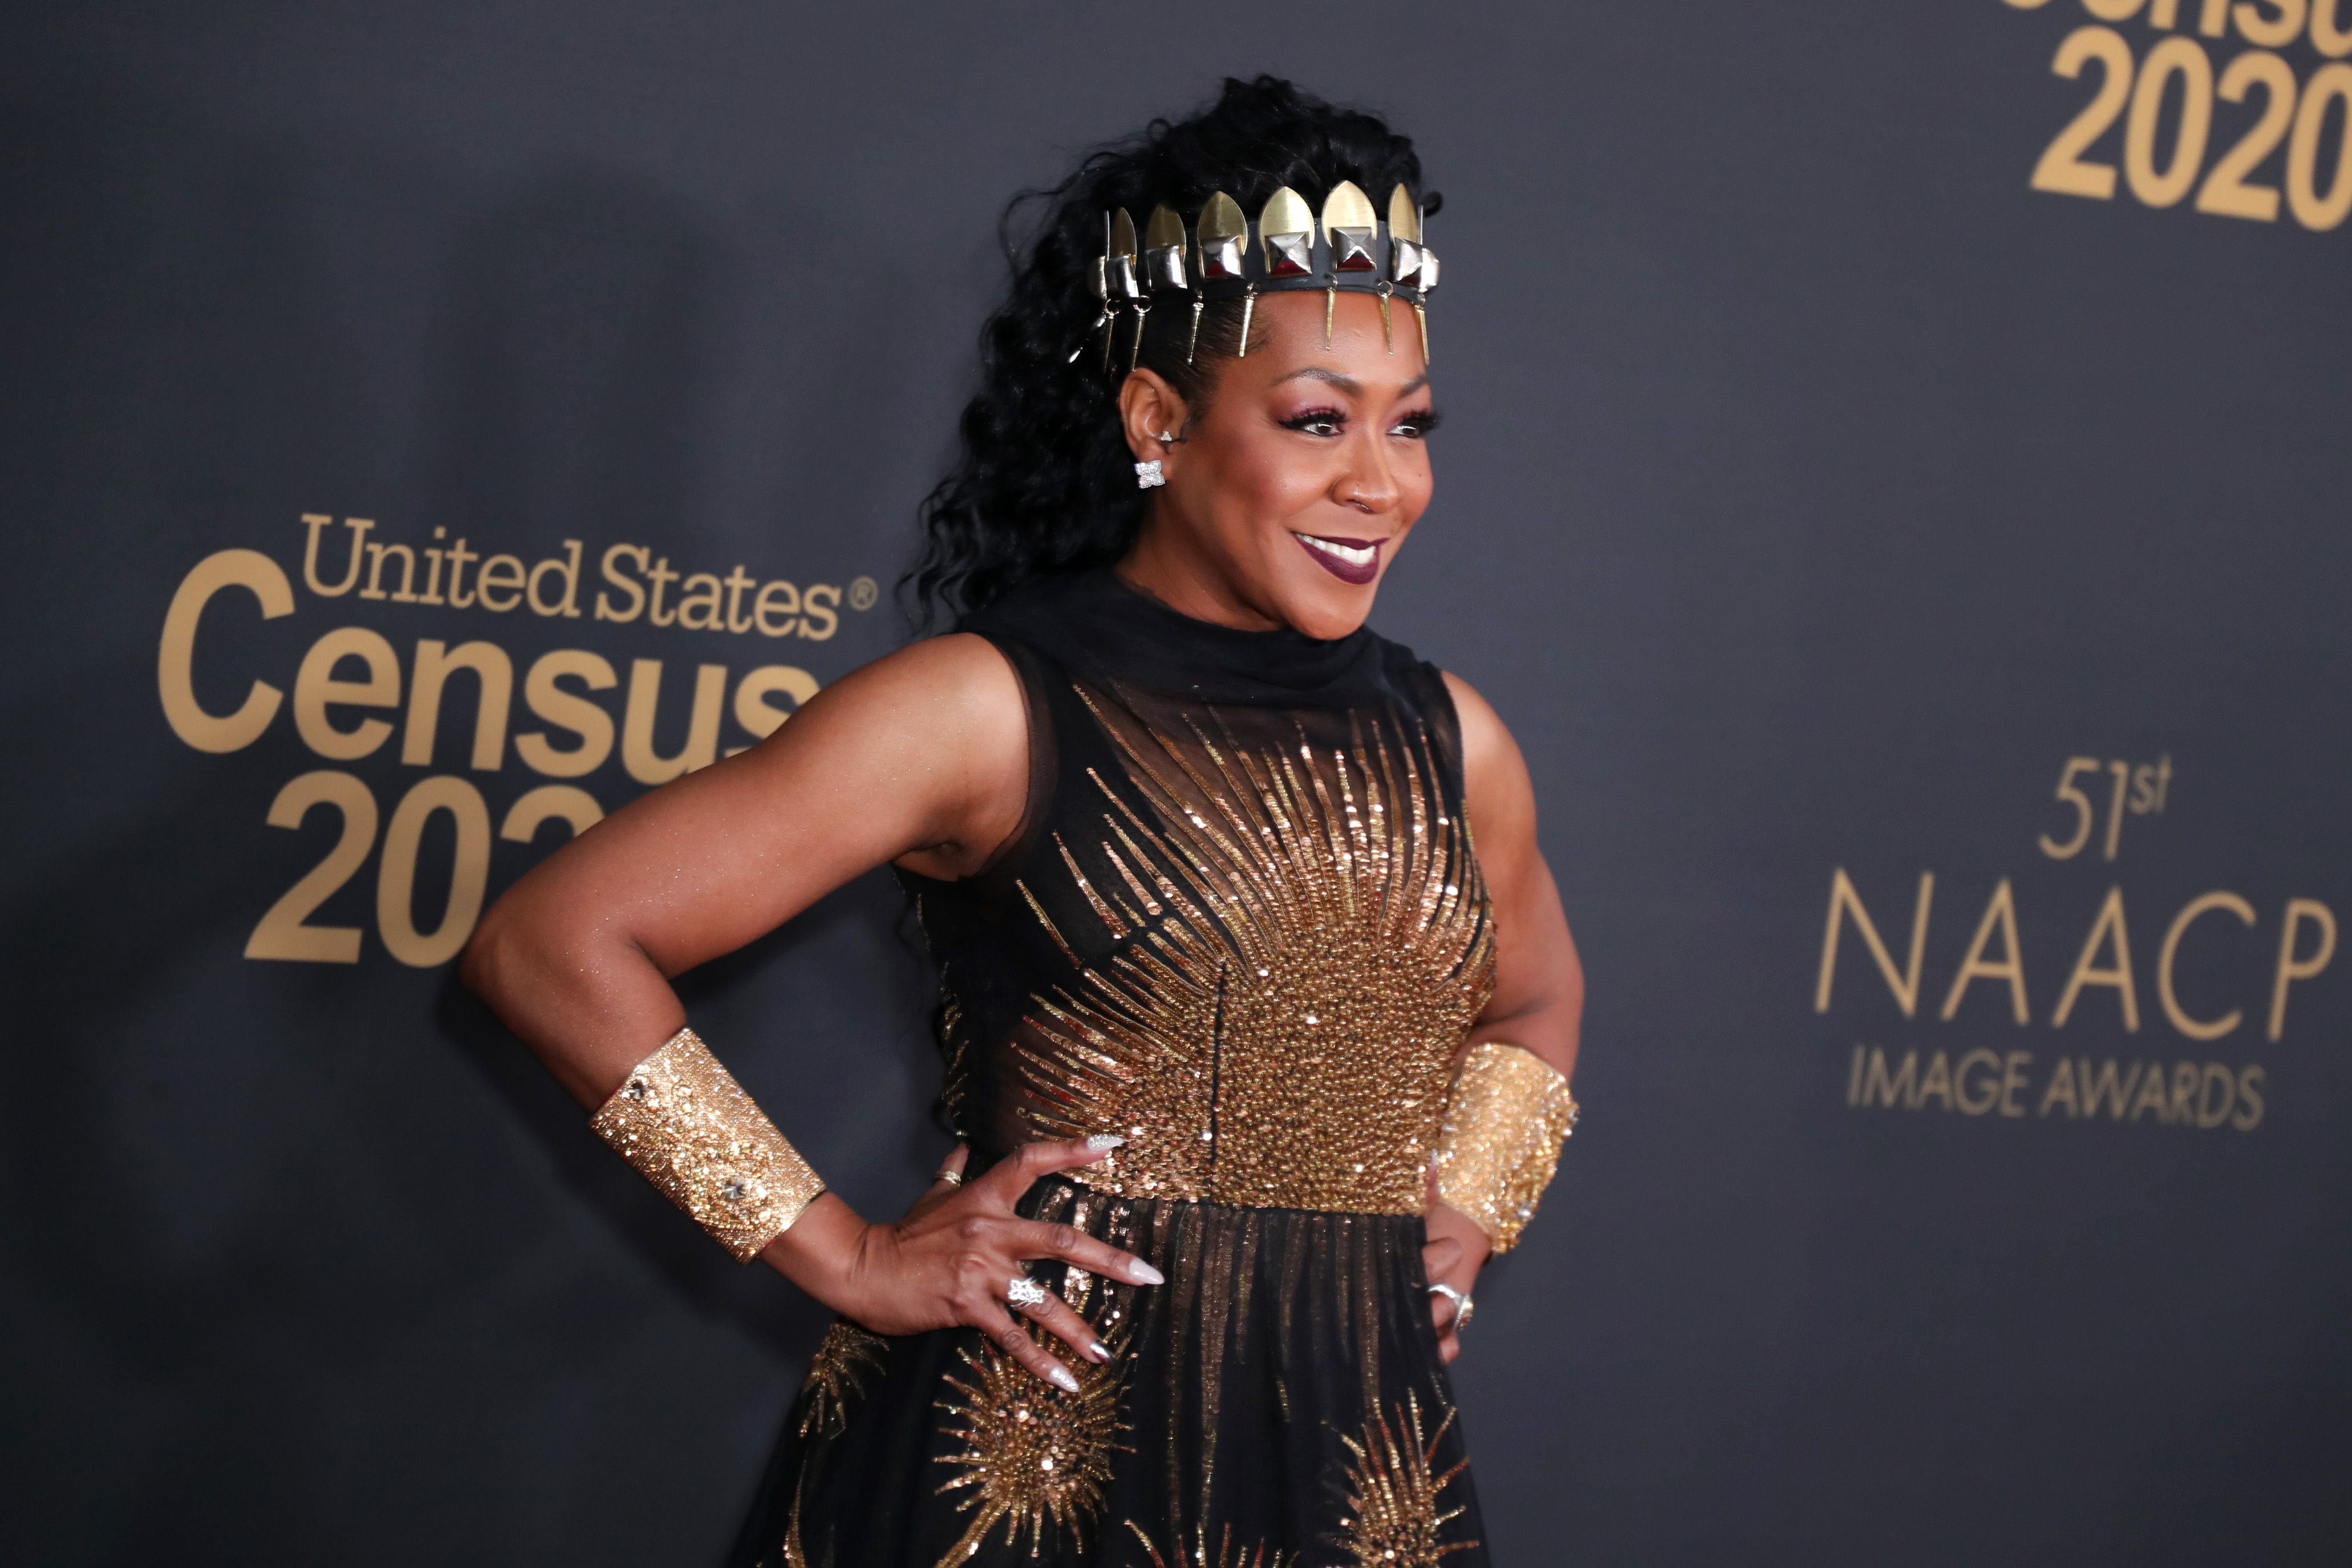 Tichina Arnold at the NAACP Image Awards on February 22, 2020 in Pasadena. | Photo: Getty Images